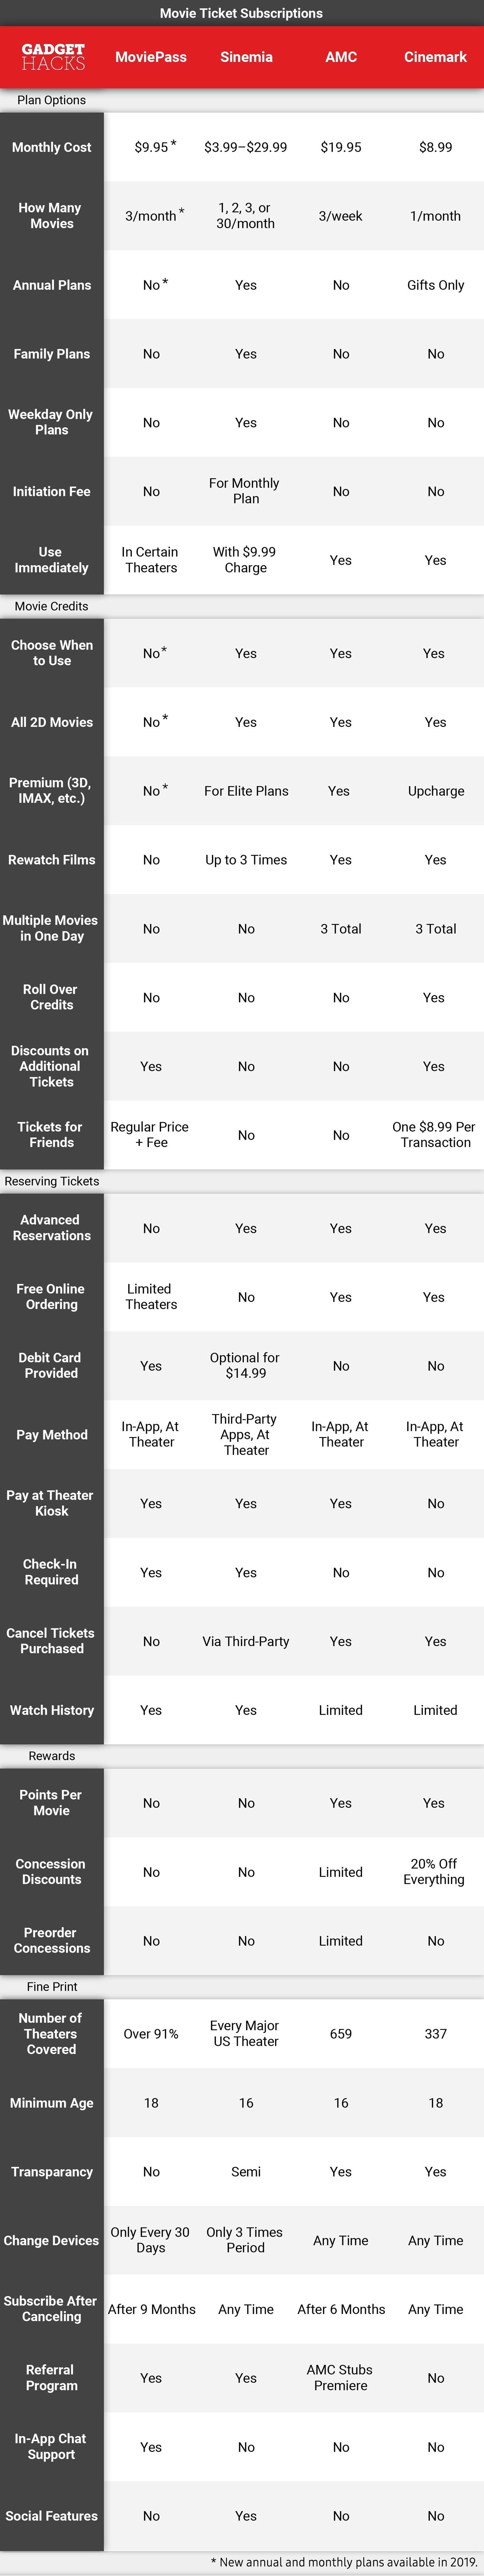 Thinking of Ditching MoviePass? Directly Compare Movie Ticket Subscriptions with This Chart